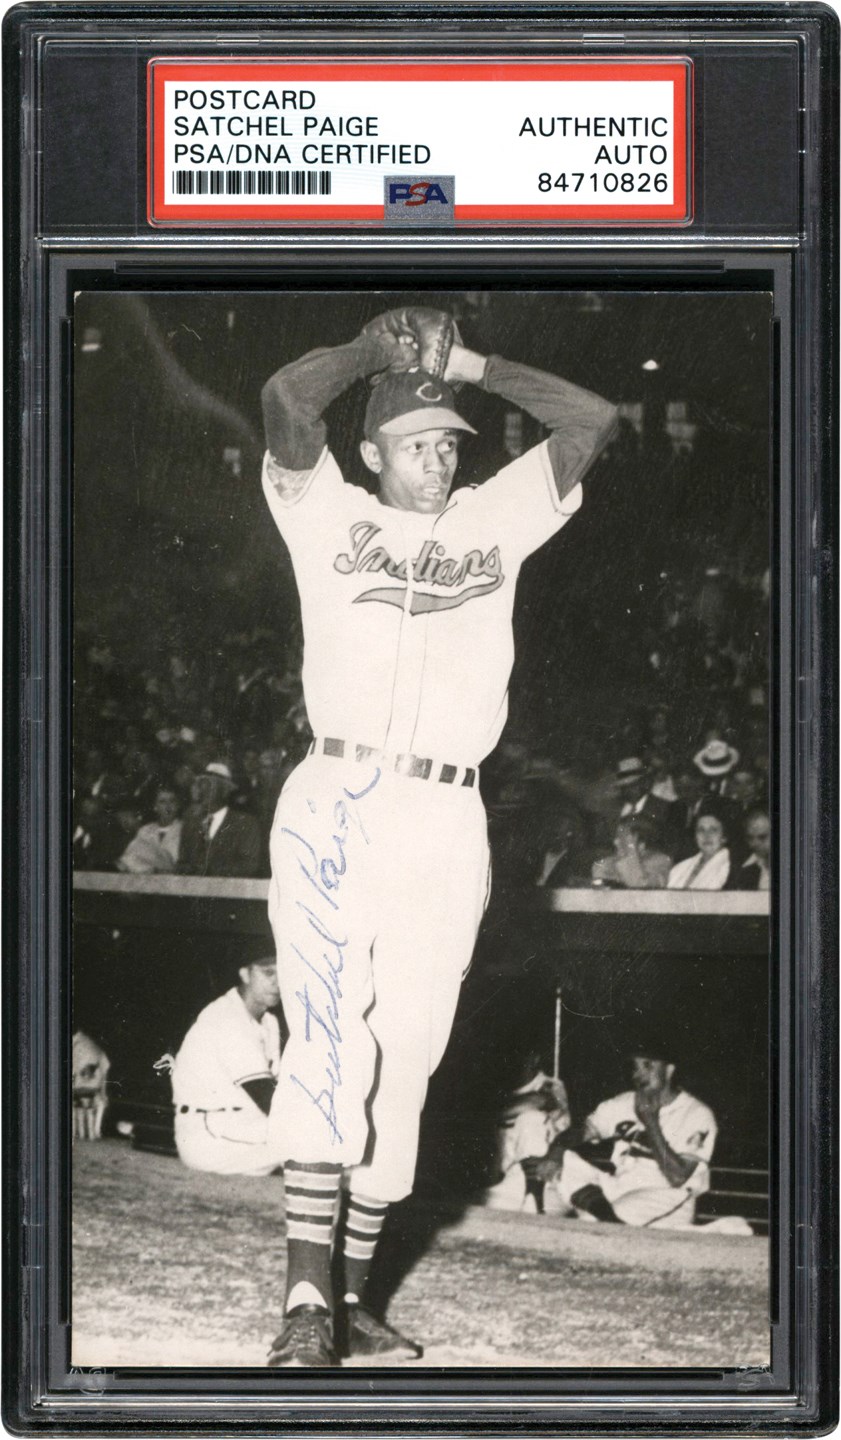 Baseball Autographs - Satchel Paige Signed Real Photo Postcard - Image Used for 1949 Team Picture Pack Photo (PSA)